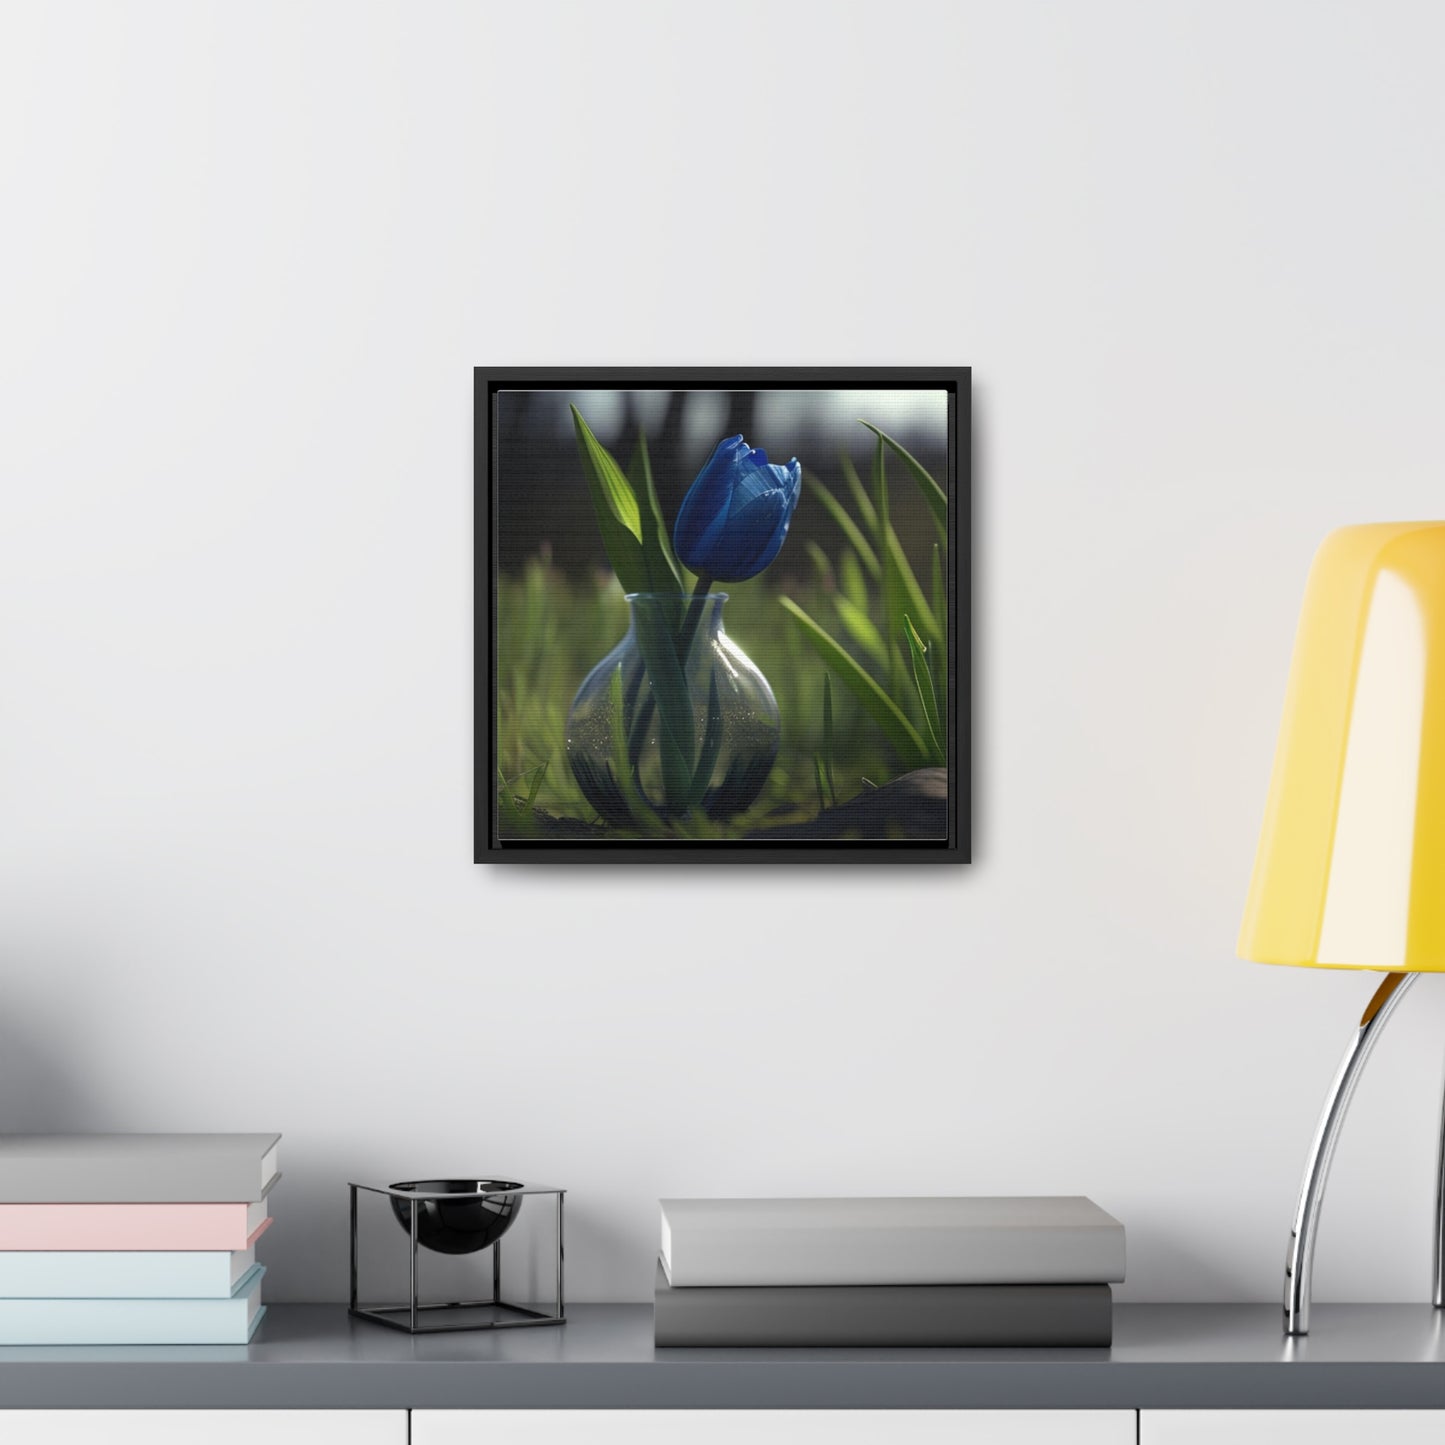 Gallery Canvas Wraps, Square Frame Tulip 1